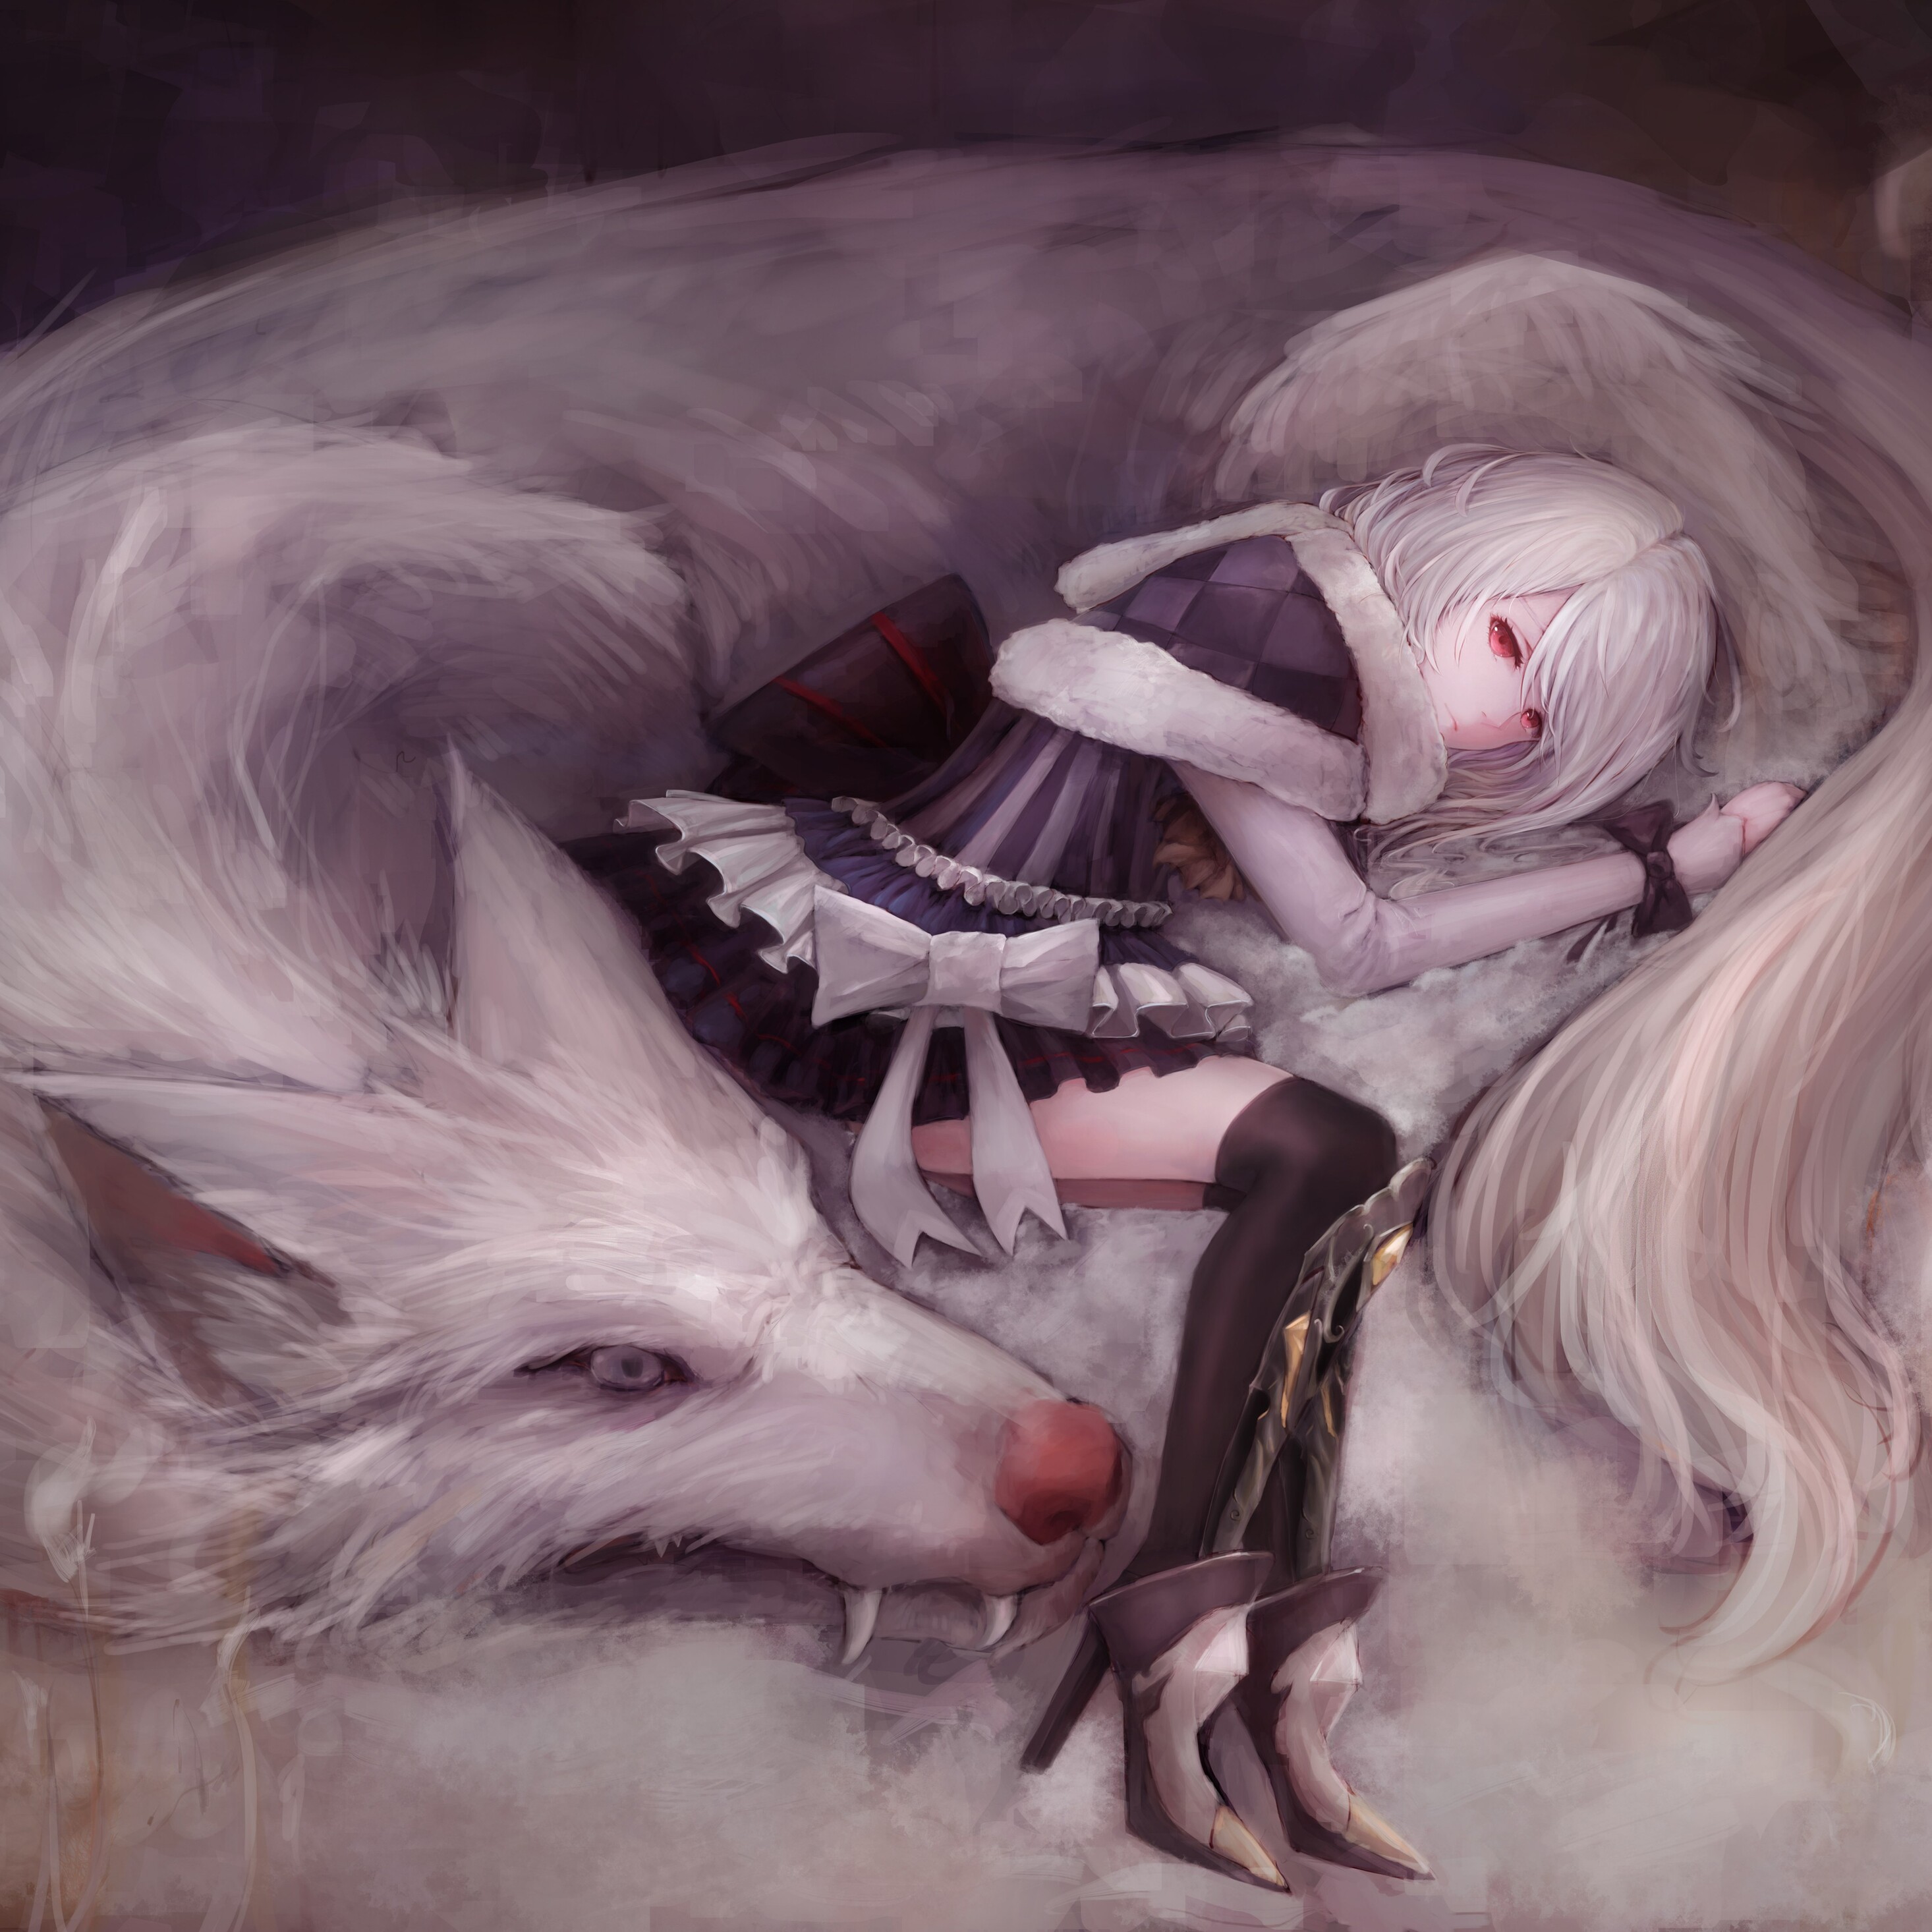 artistic-girl-with-wolf-5k-4q.jpg